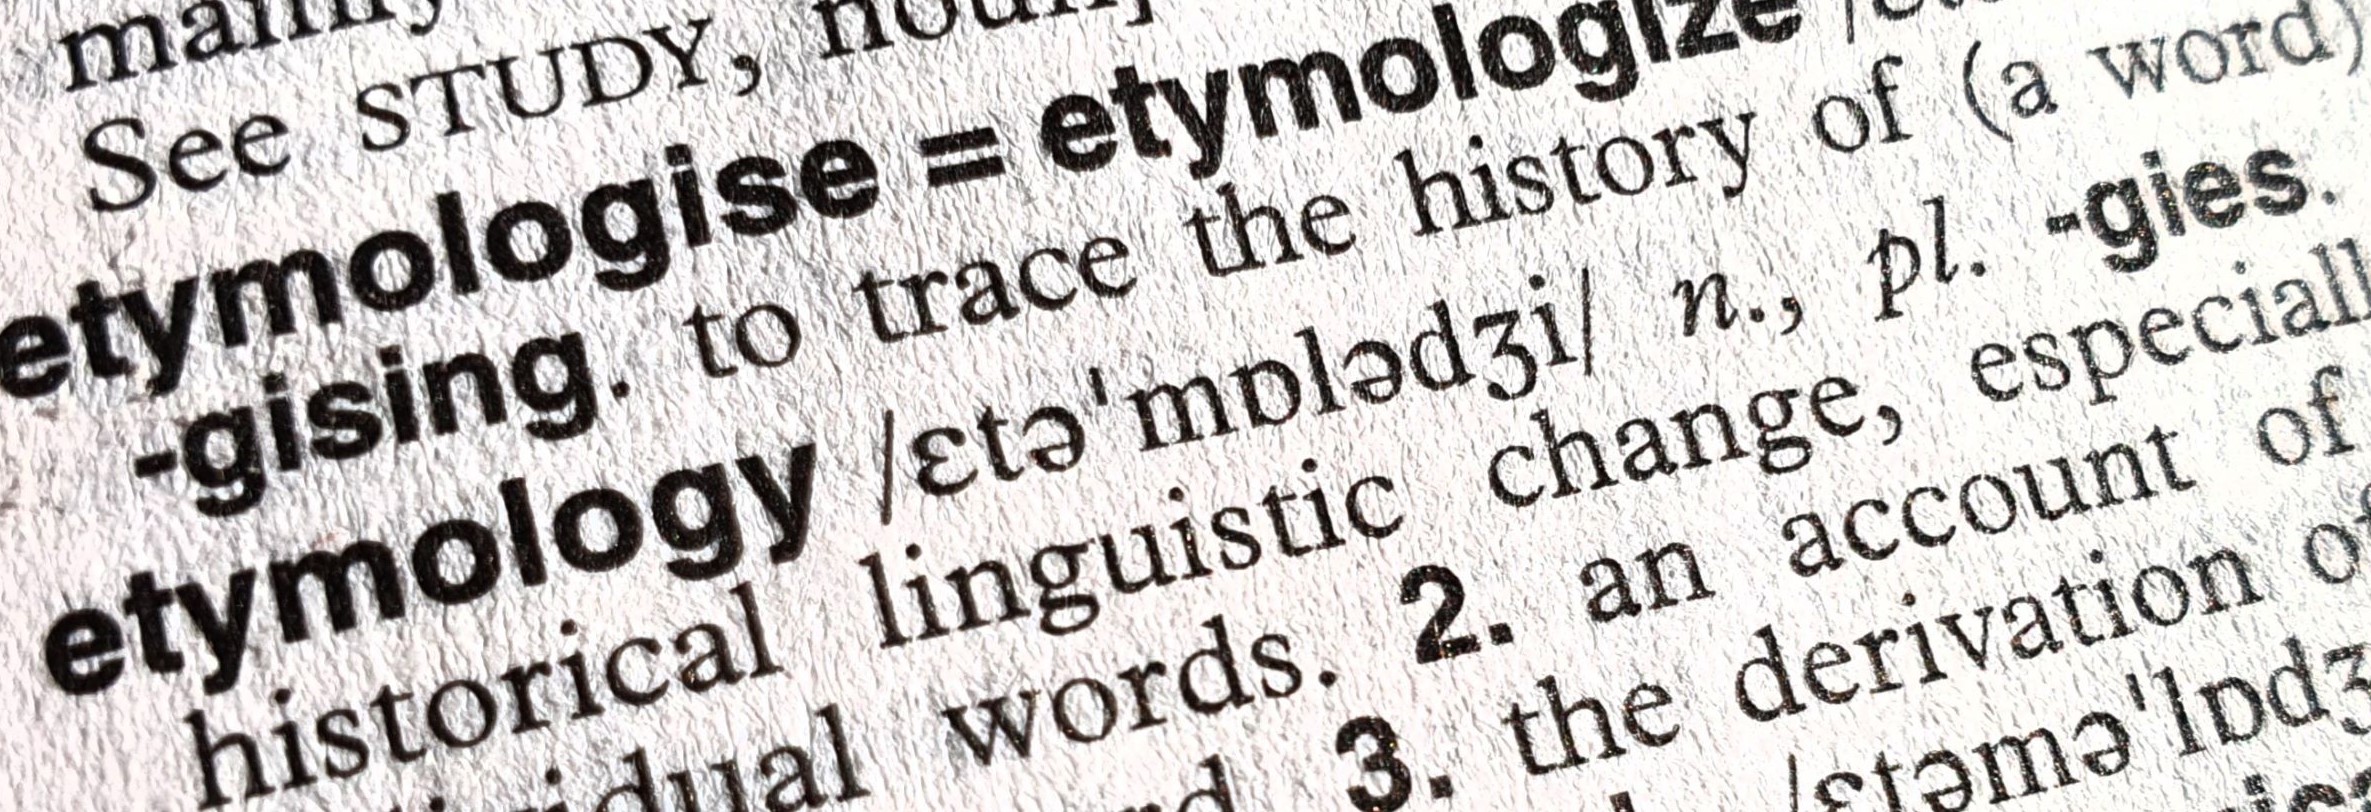 Care for Language: Etymology as a Continental Argument in Bioethics